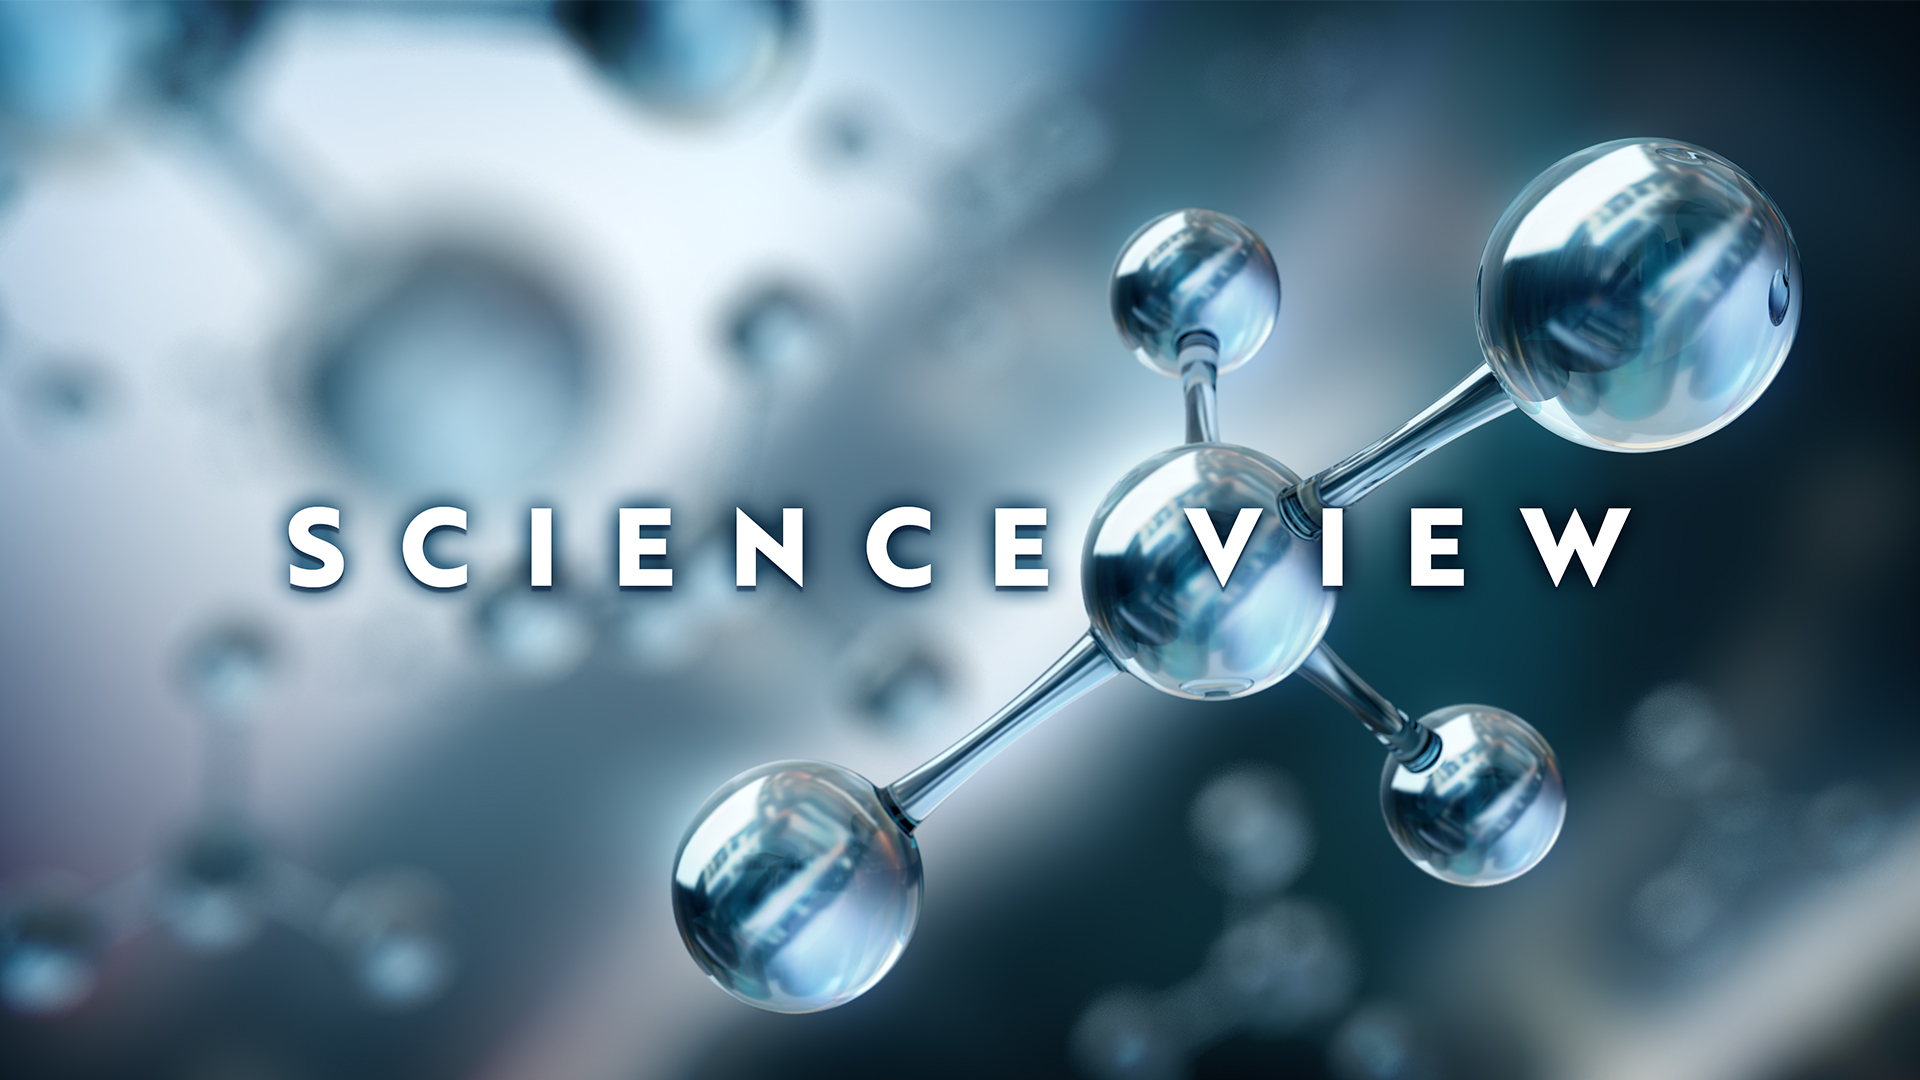 Check out Science View Season 3 airing on a public television station near you!